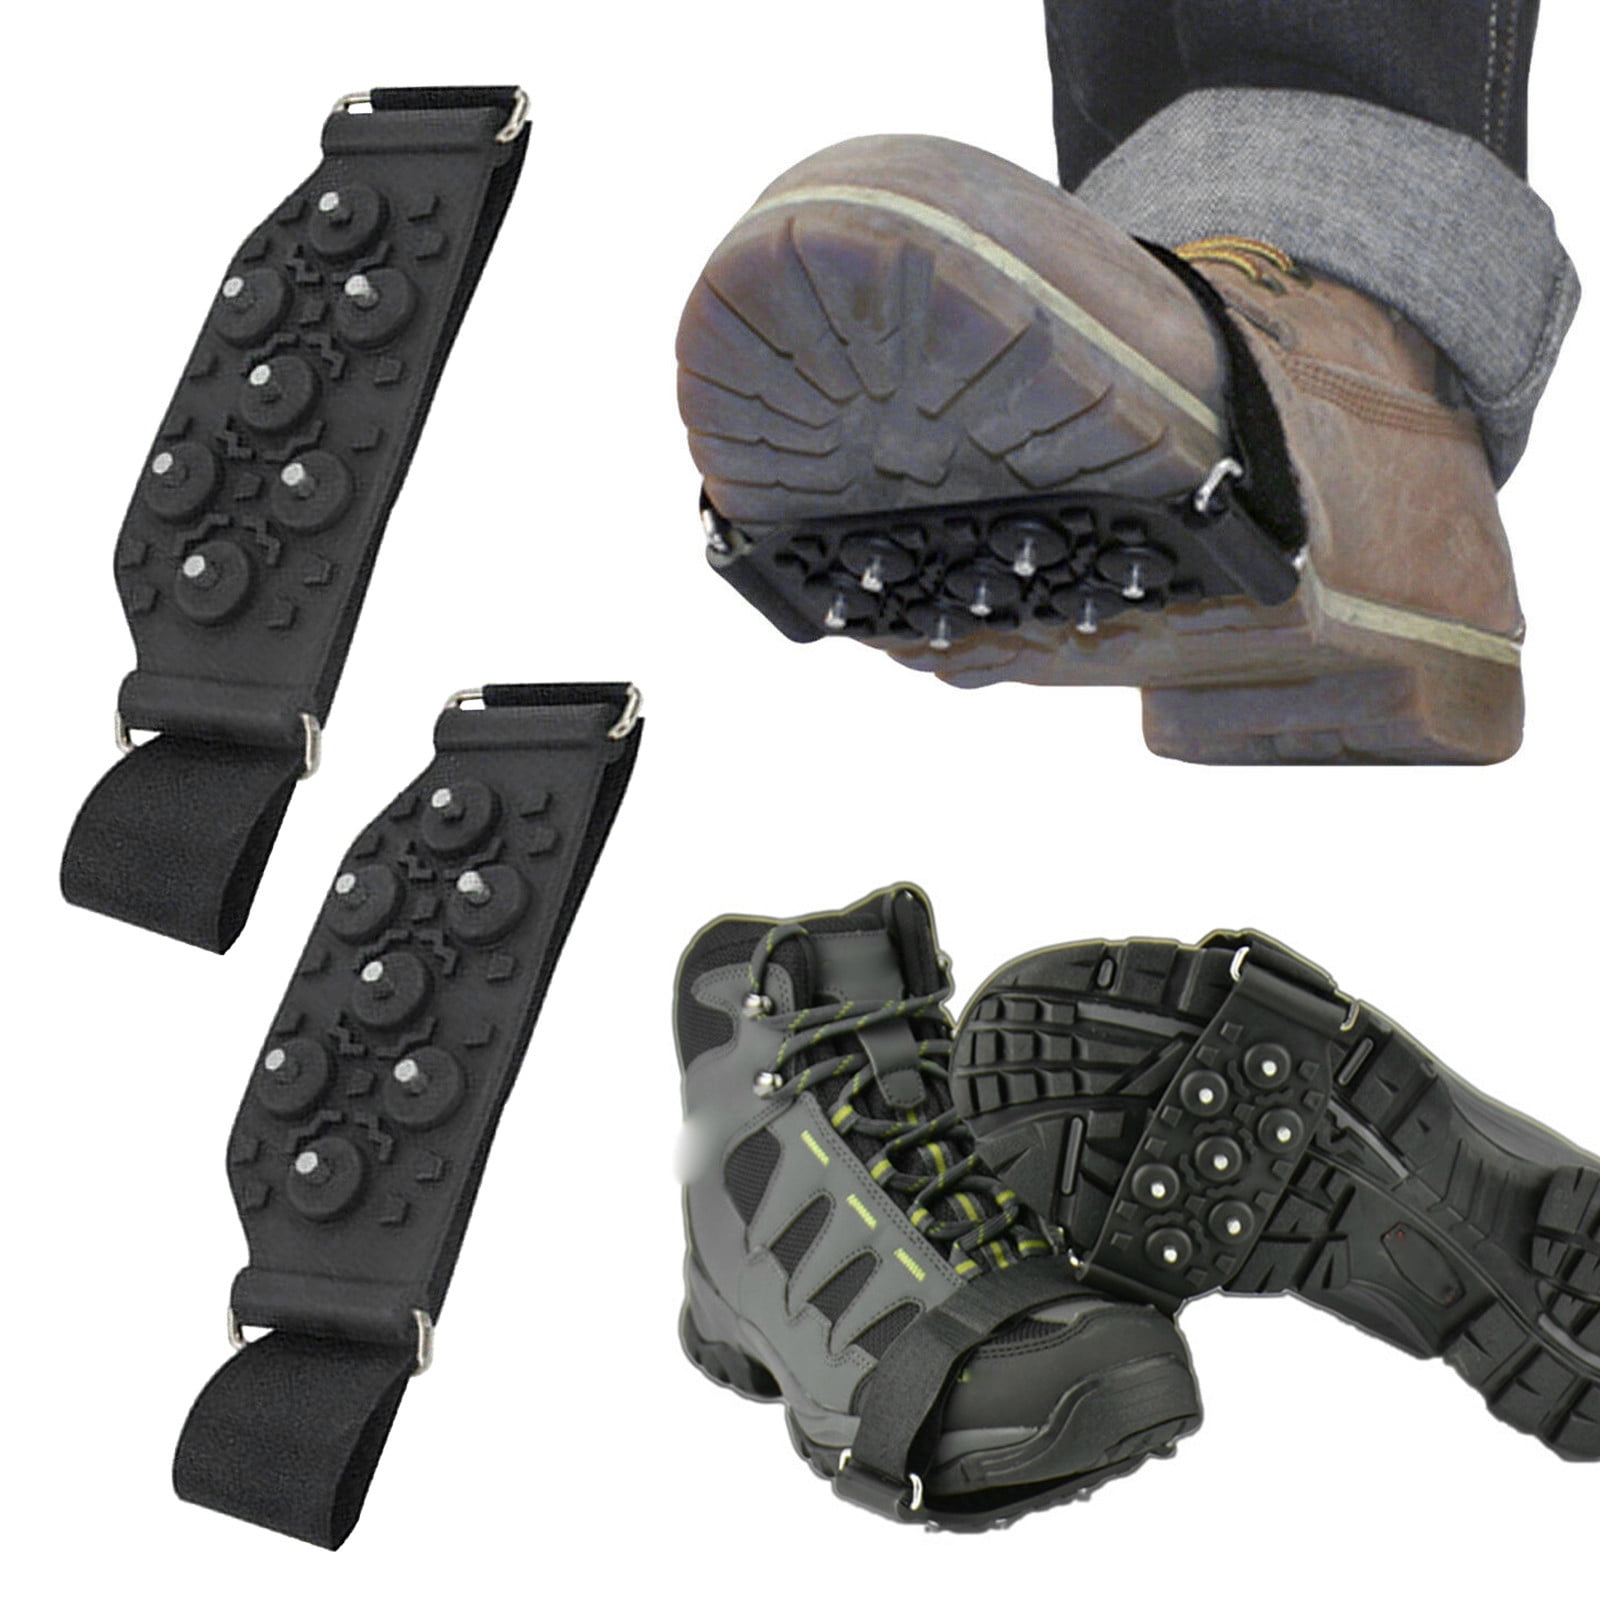 Ice Grips Anti Slip Universal Snow Spikes Crampons Boot Shoes Grippers Cleats 